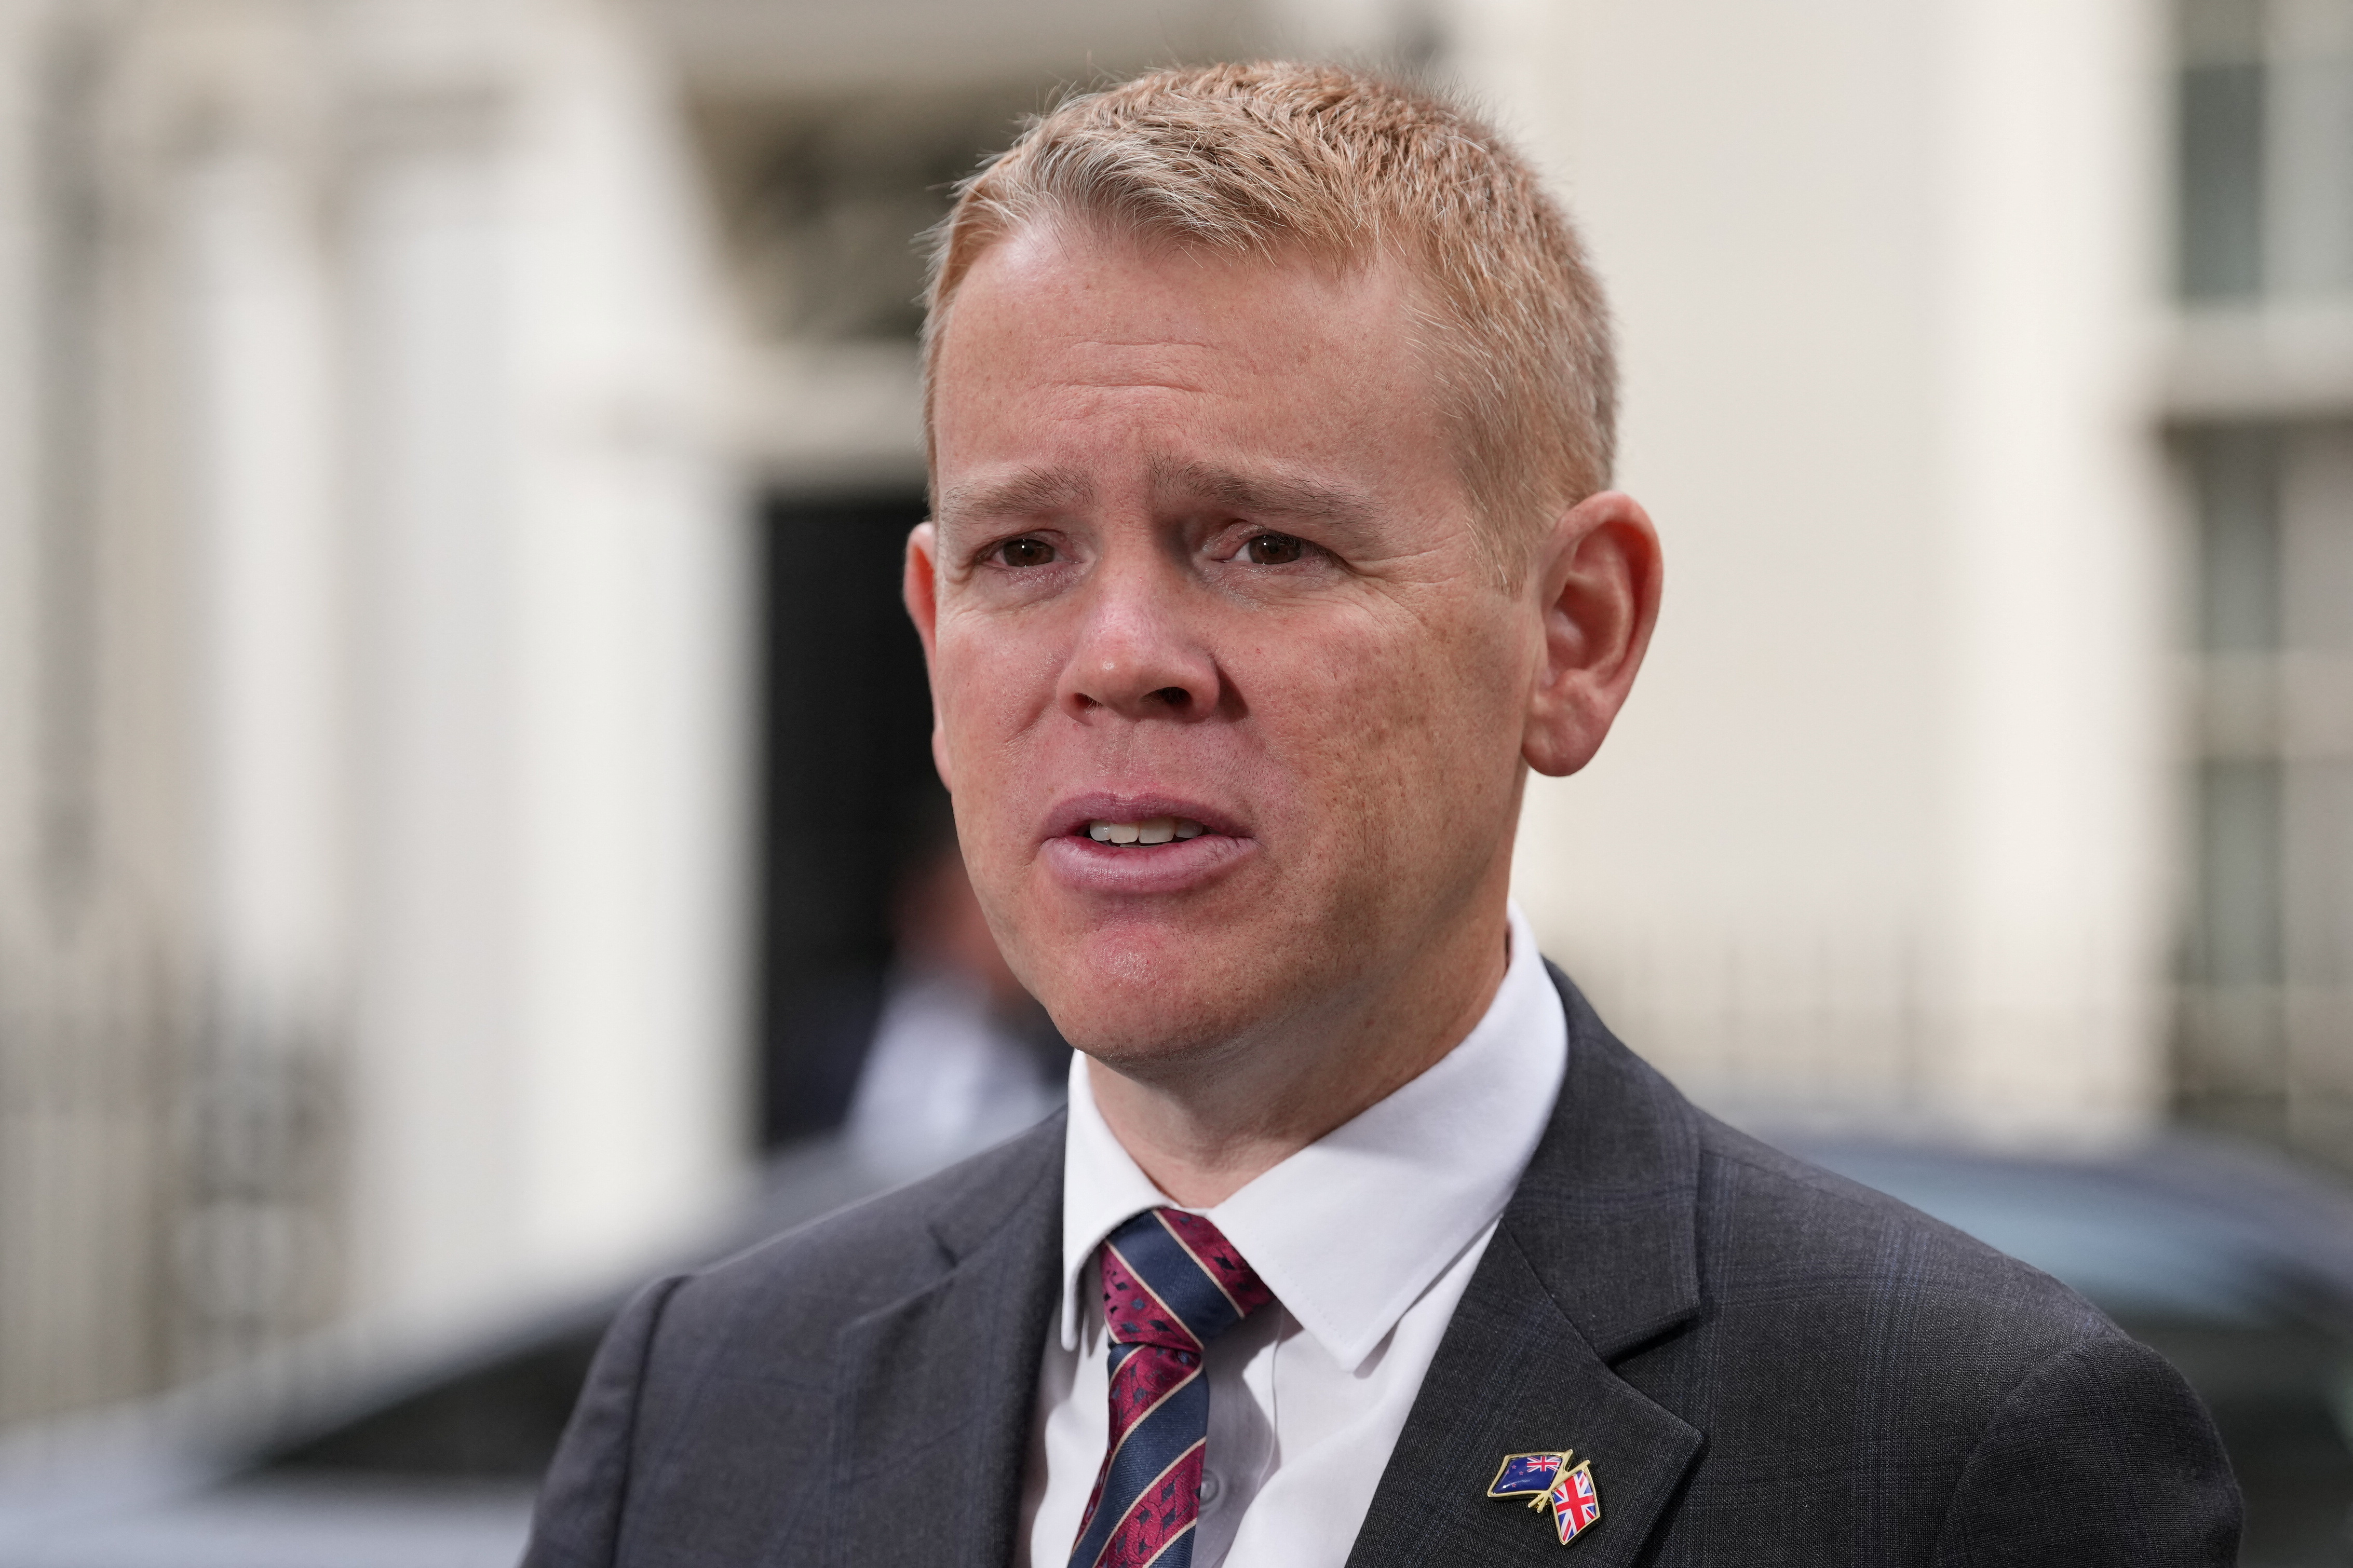 New Zealand's Prime Minister Chris Hipkins speaks to the media at Downing Street in London